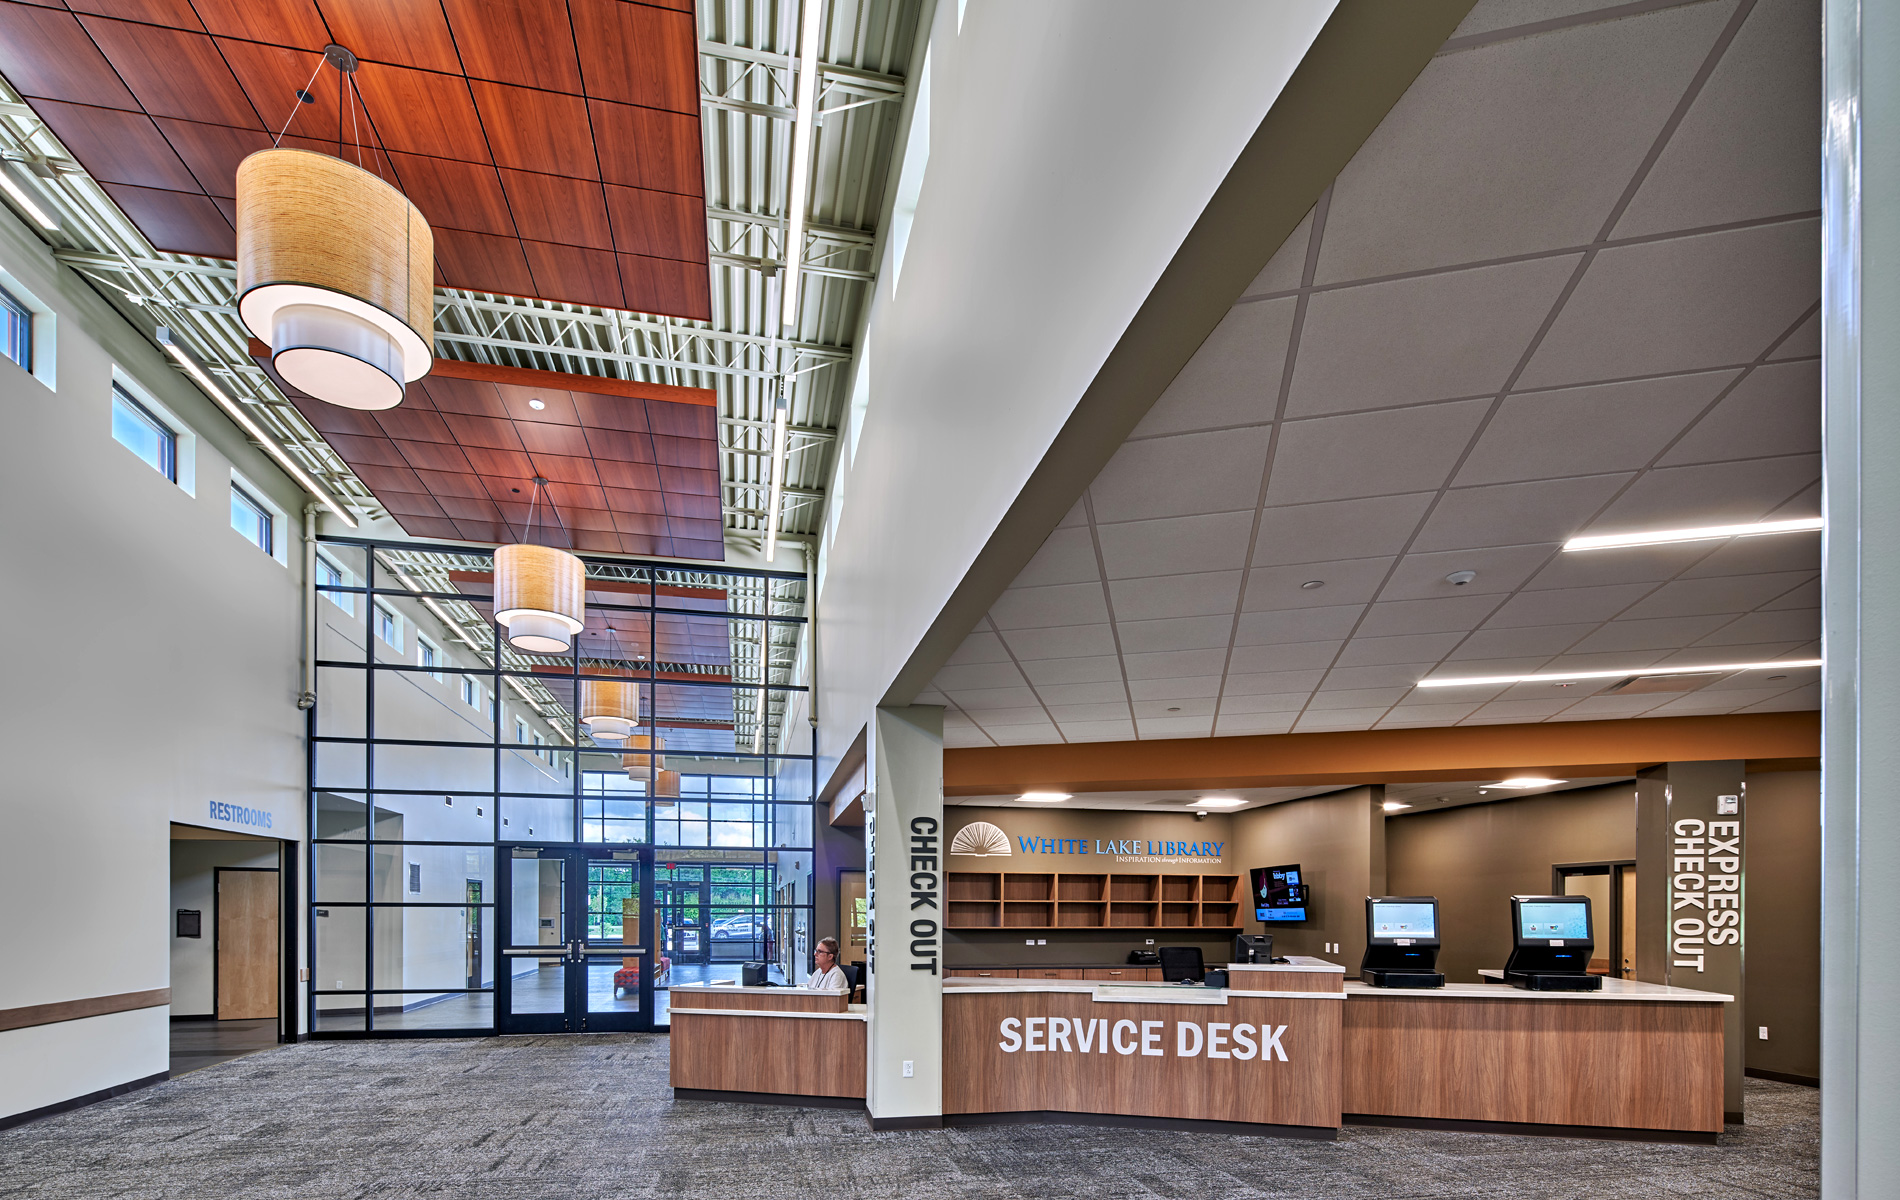 Image of interior of White Lake library showing circulation desk